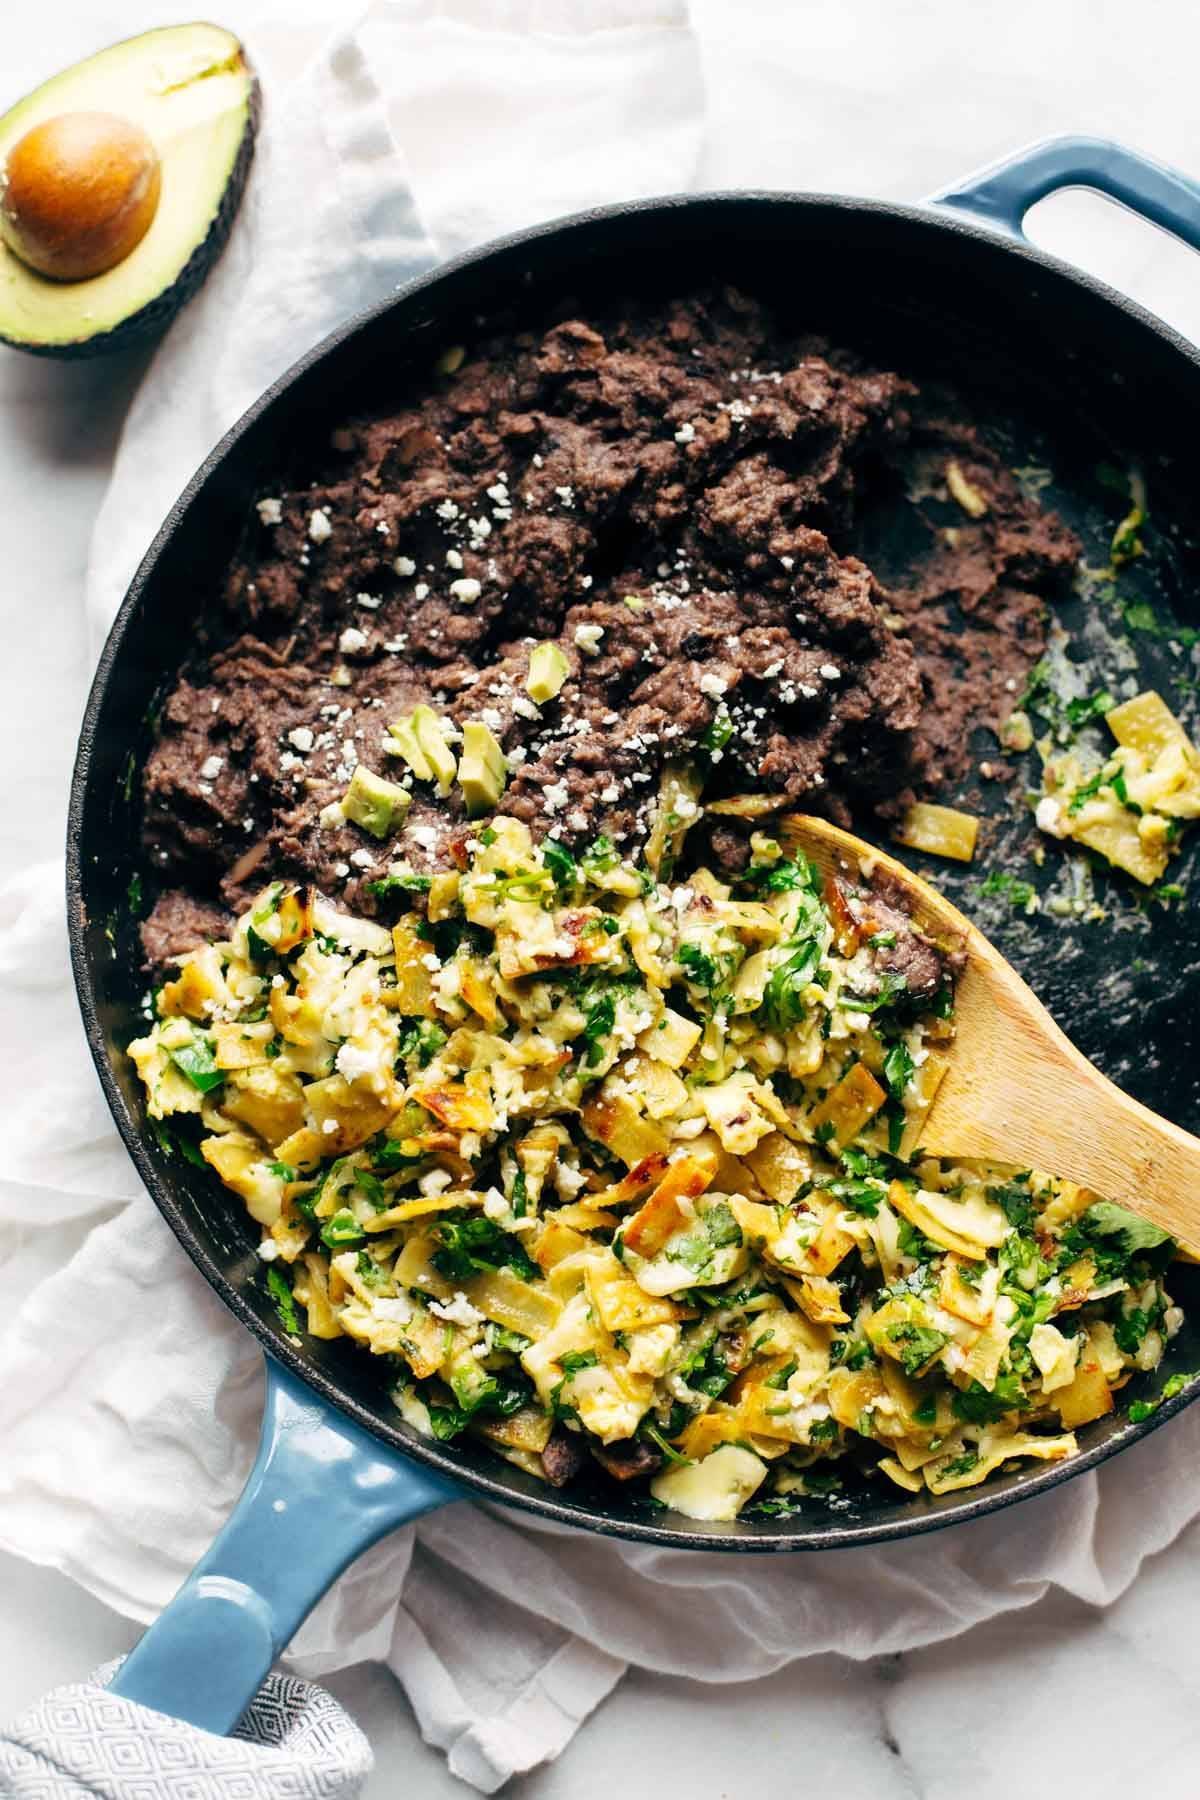 Migas ingredients in a pan with a wooden spoon and an avocado.